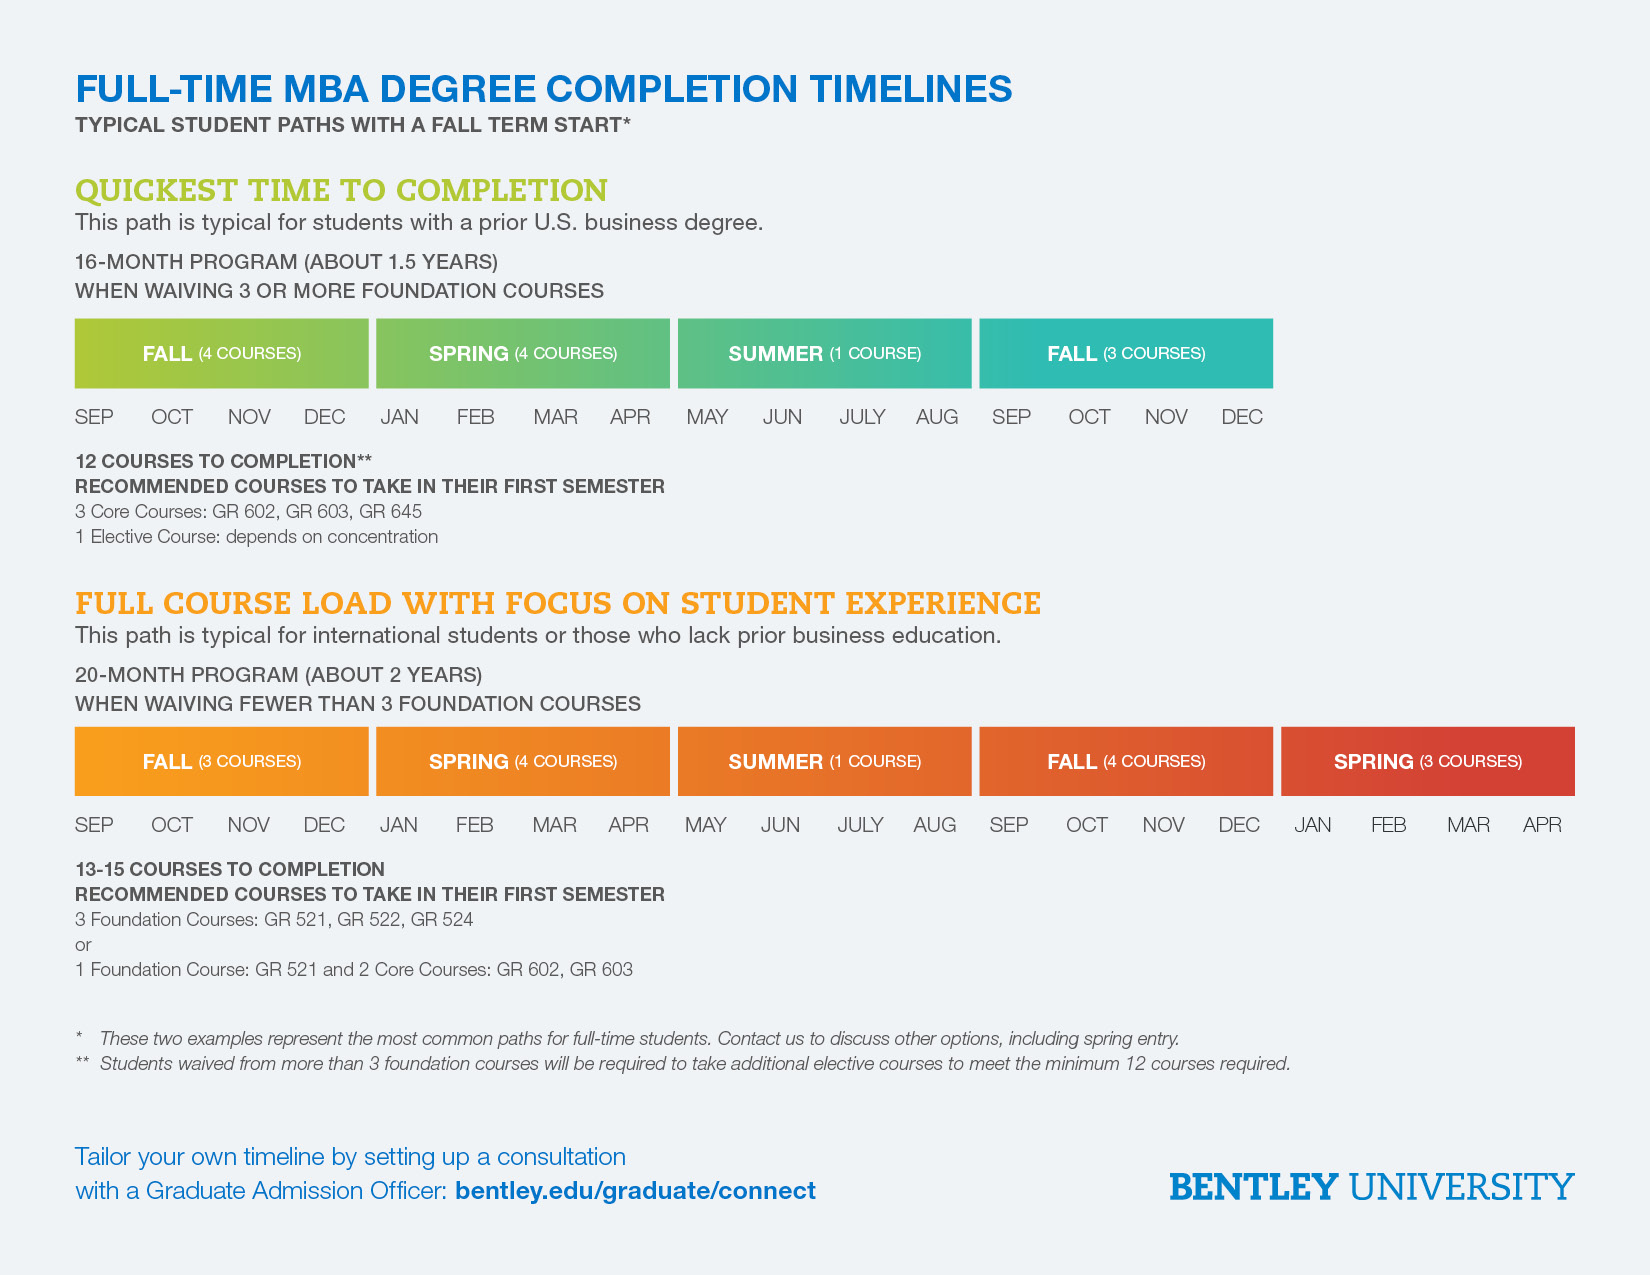 Image showing typical times to completion for full-time MBA students